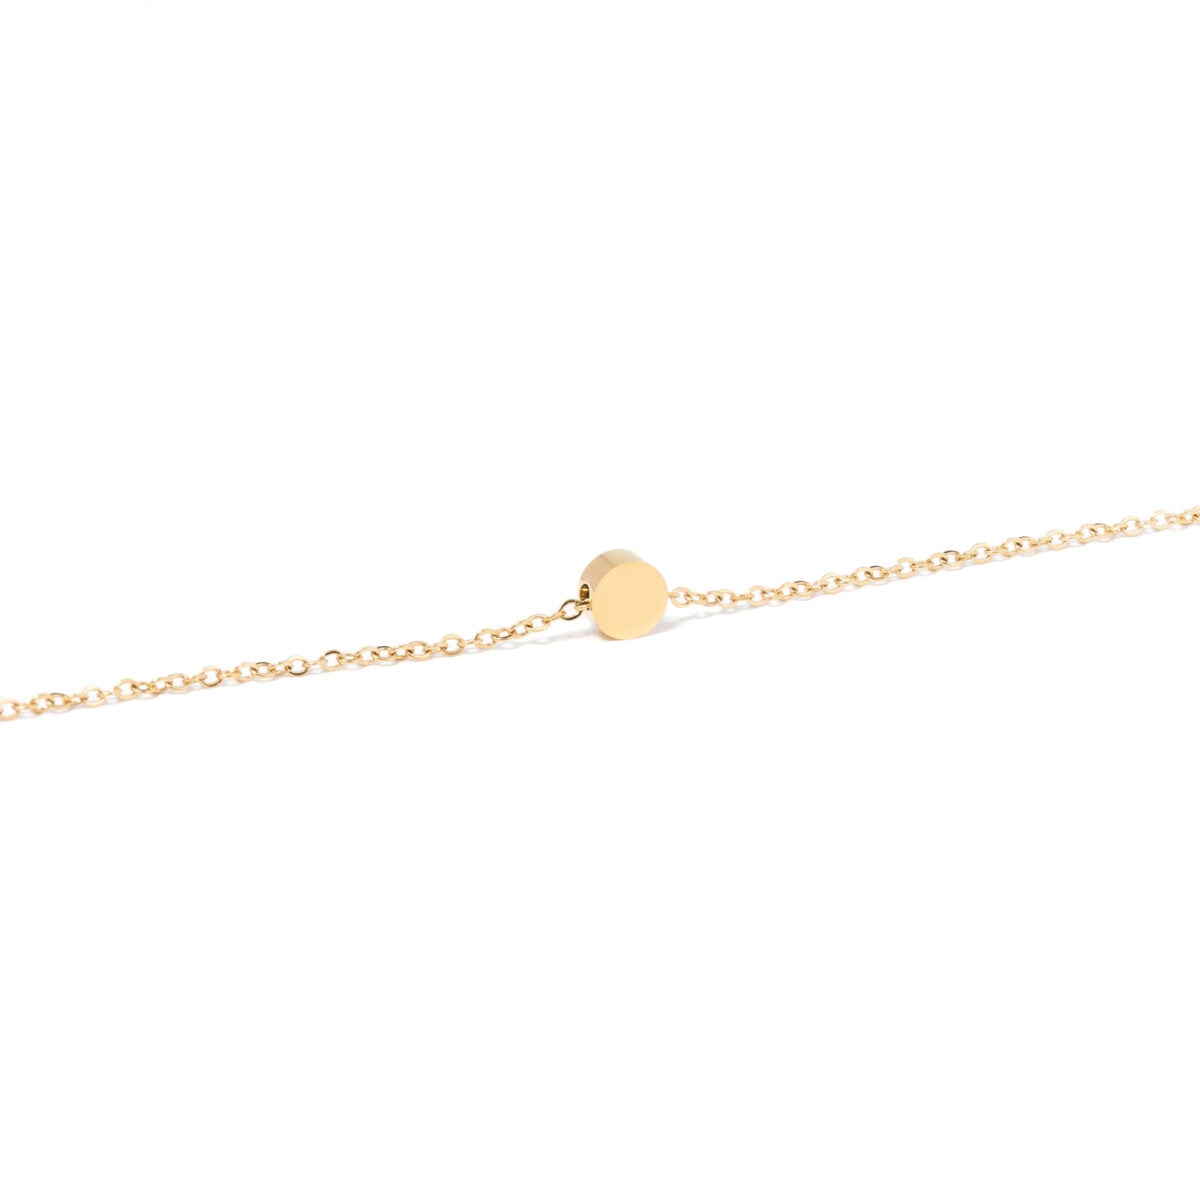 https://m.clubbella.co/product/dainty-sphere-necklace/ Dainty Sphere Necklace (2)